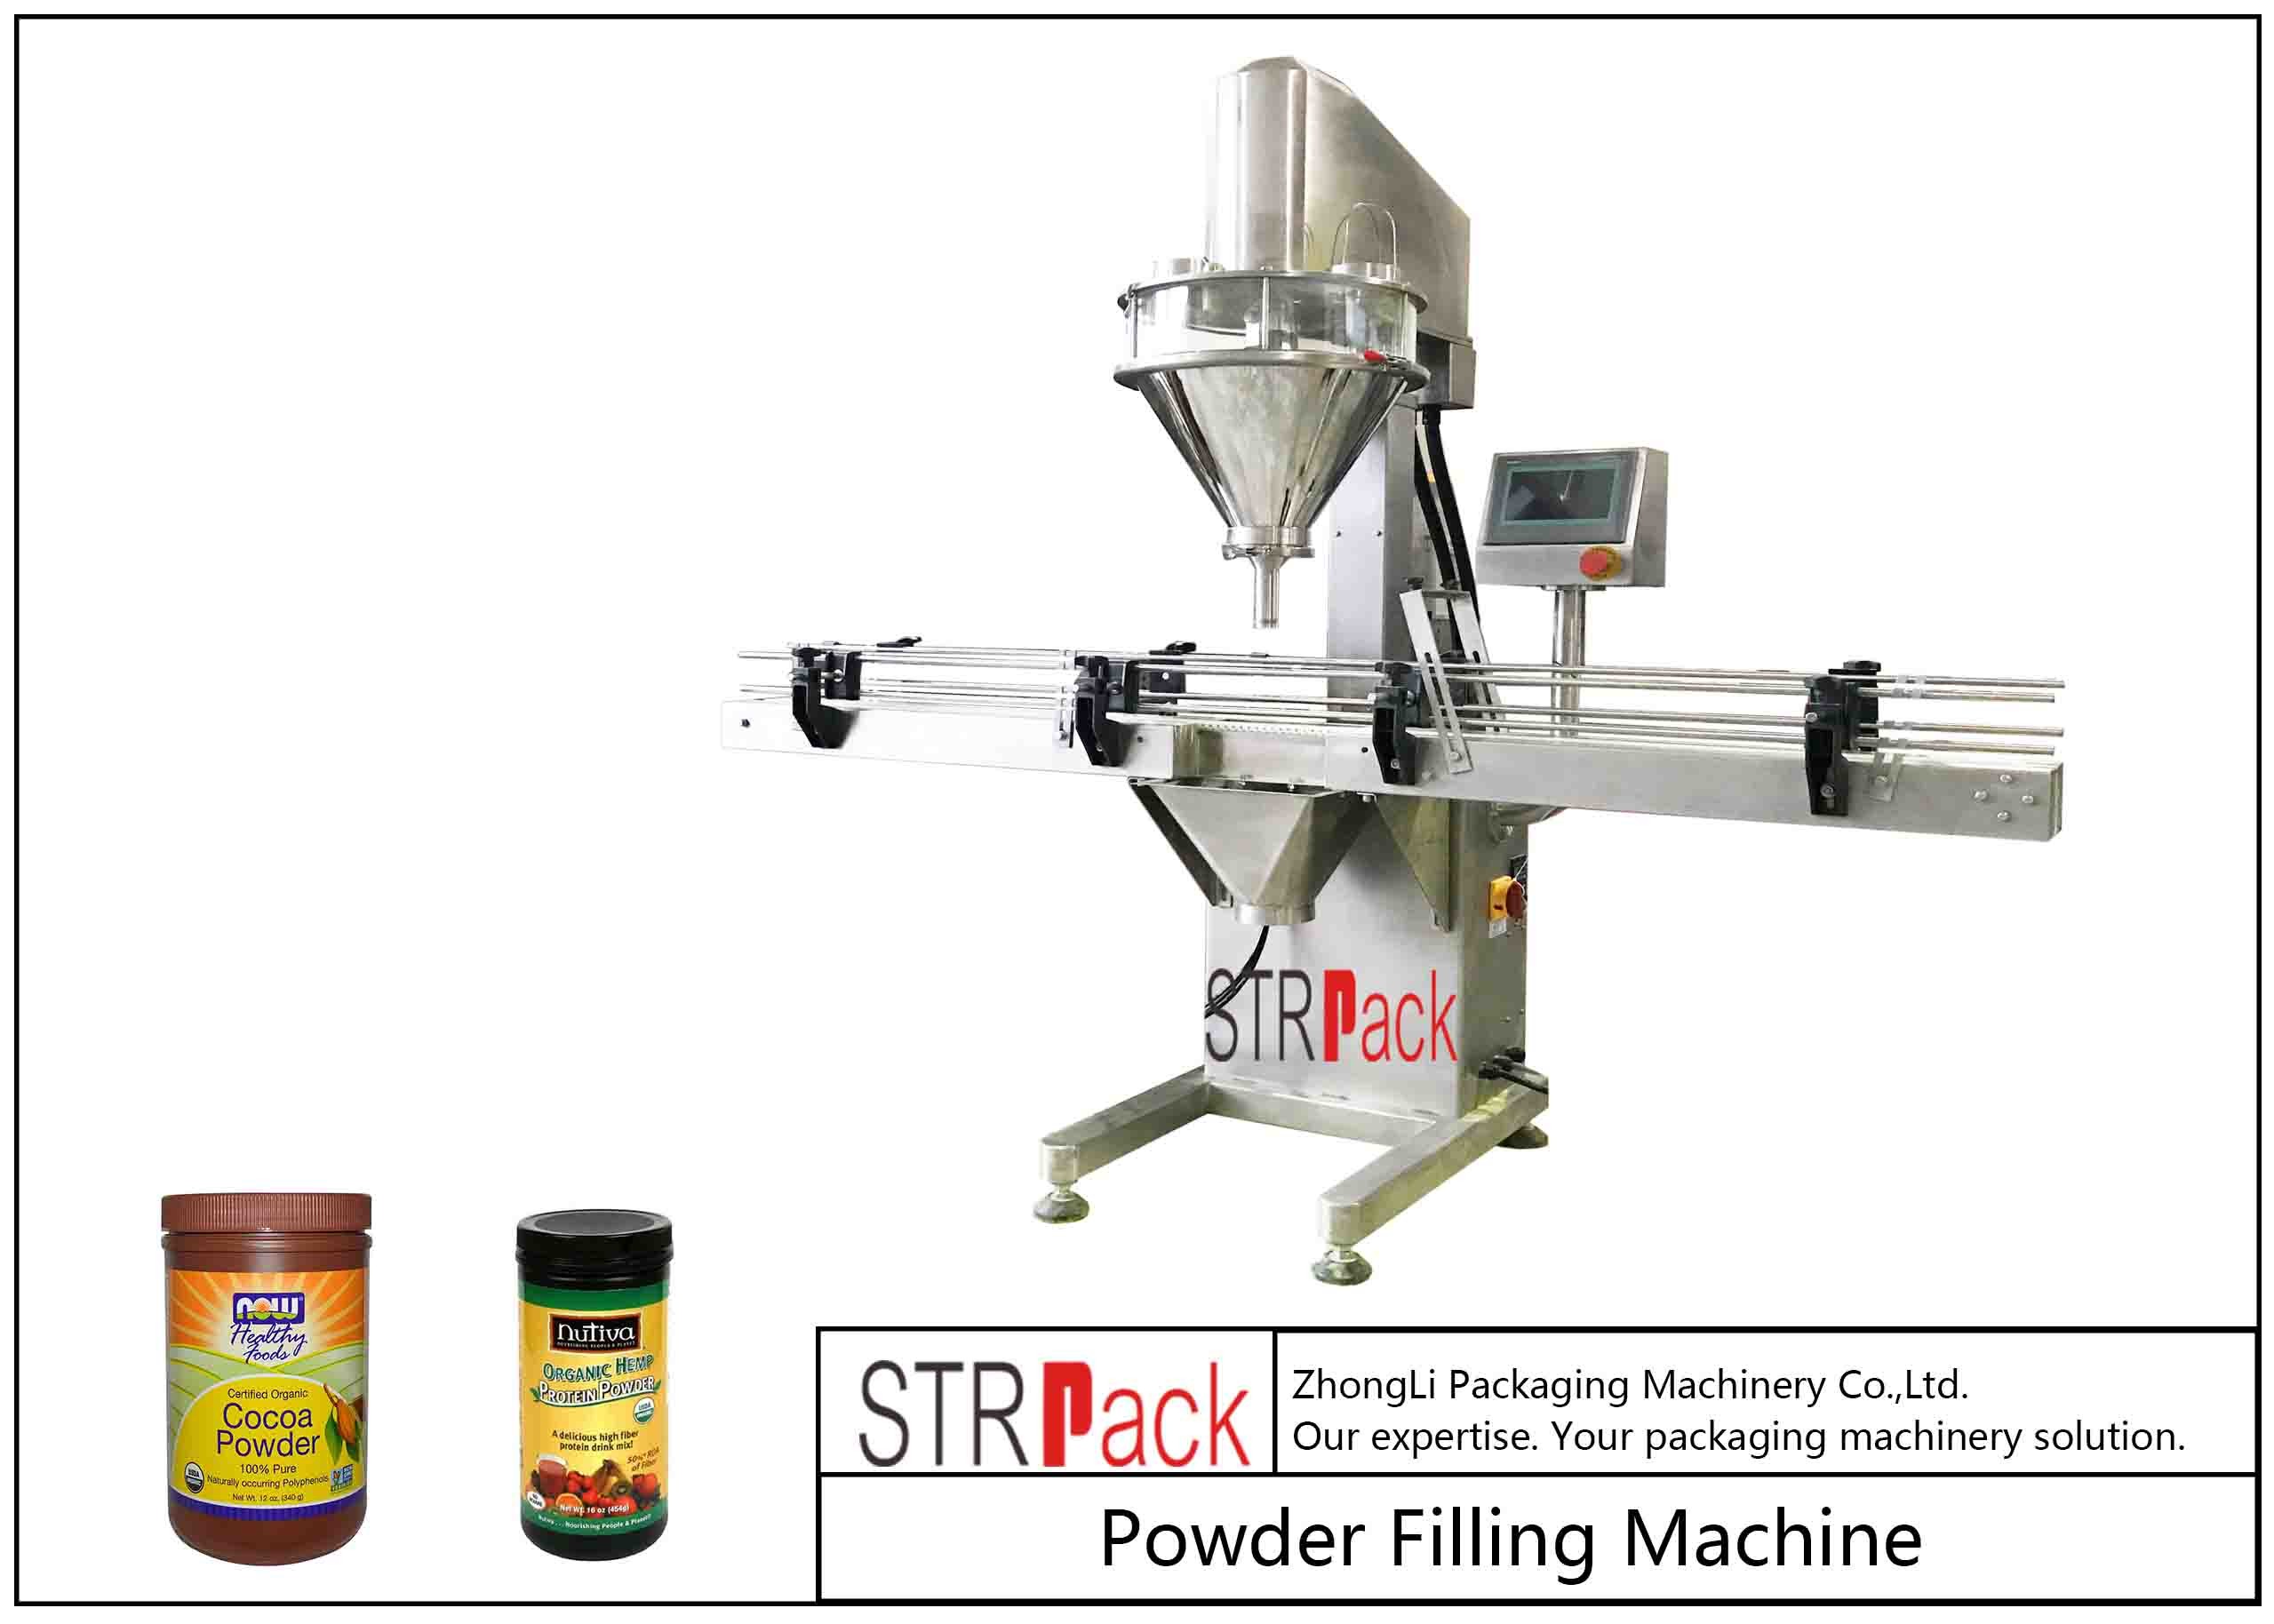 China 10g-5000g Linear Automatic Powder Filling Machine 50 BPM Speed With 25L Hopper wholesale